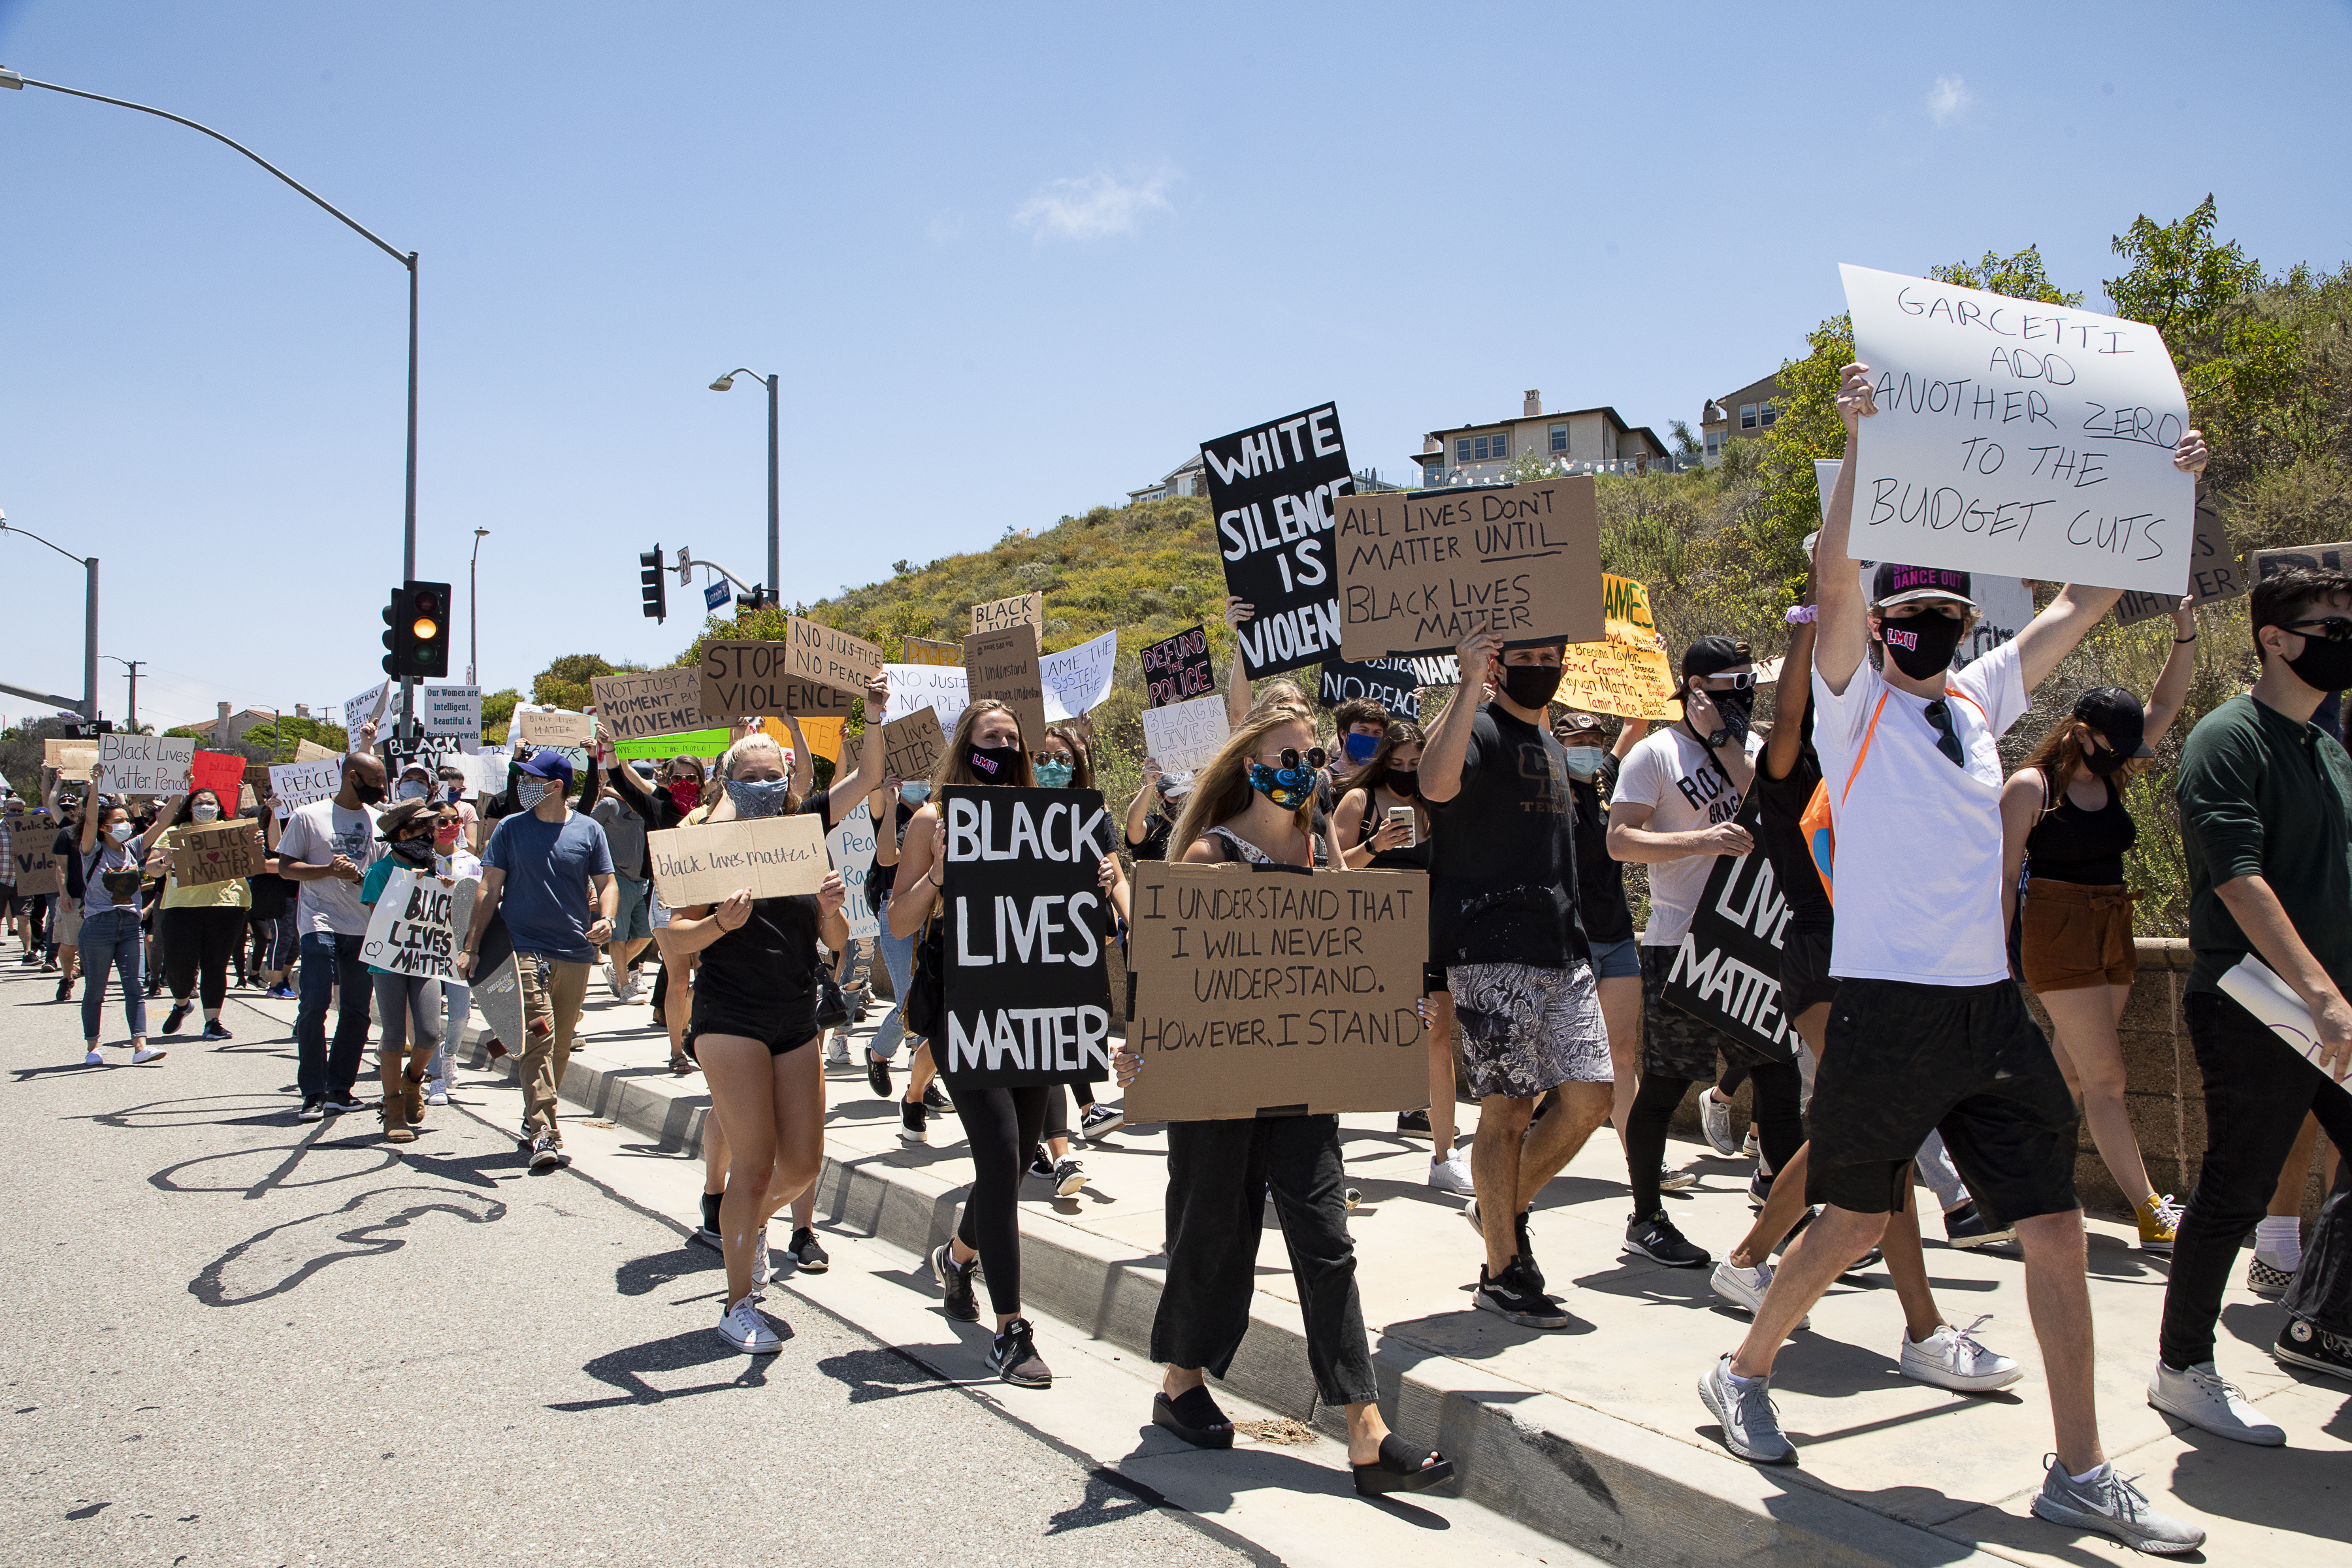 image of protesters marching with signs outside of LMU. The center sign reads Black Lives Matter